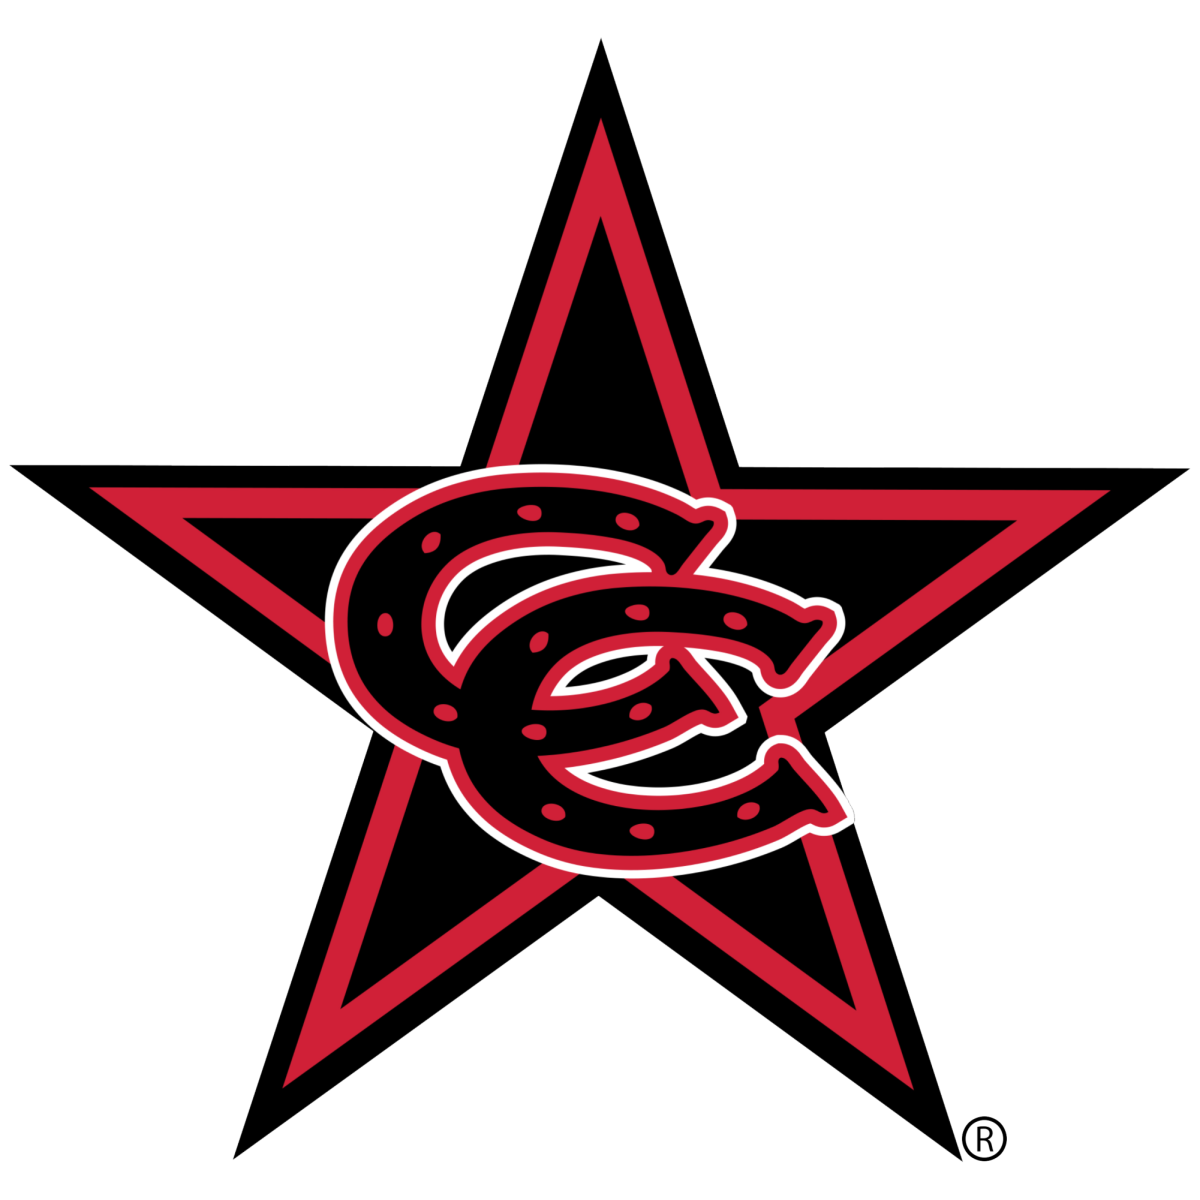 The Coppell track team advances 31 runners to the Class 6A Region I Area meet on Friday at Denton Braswell High School. 